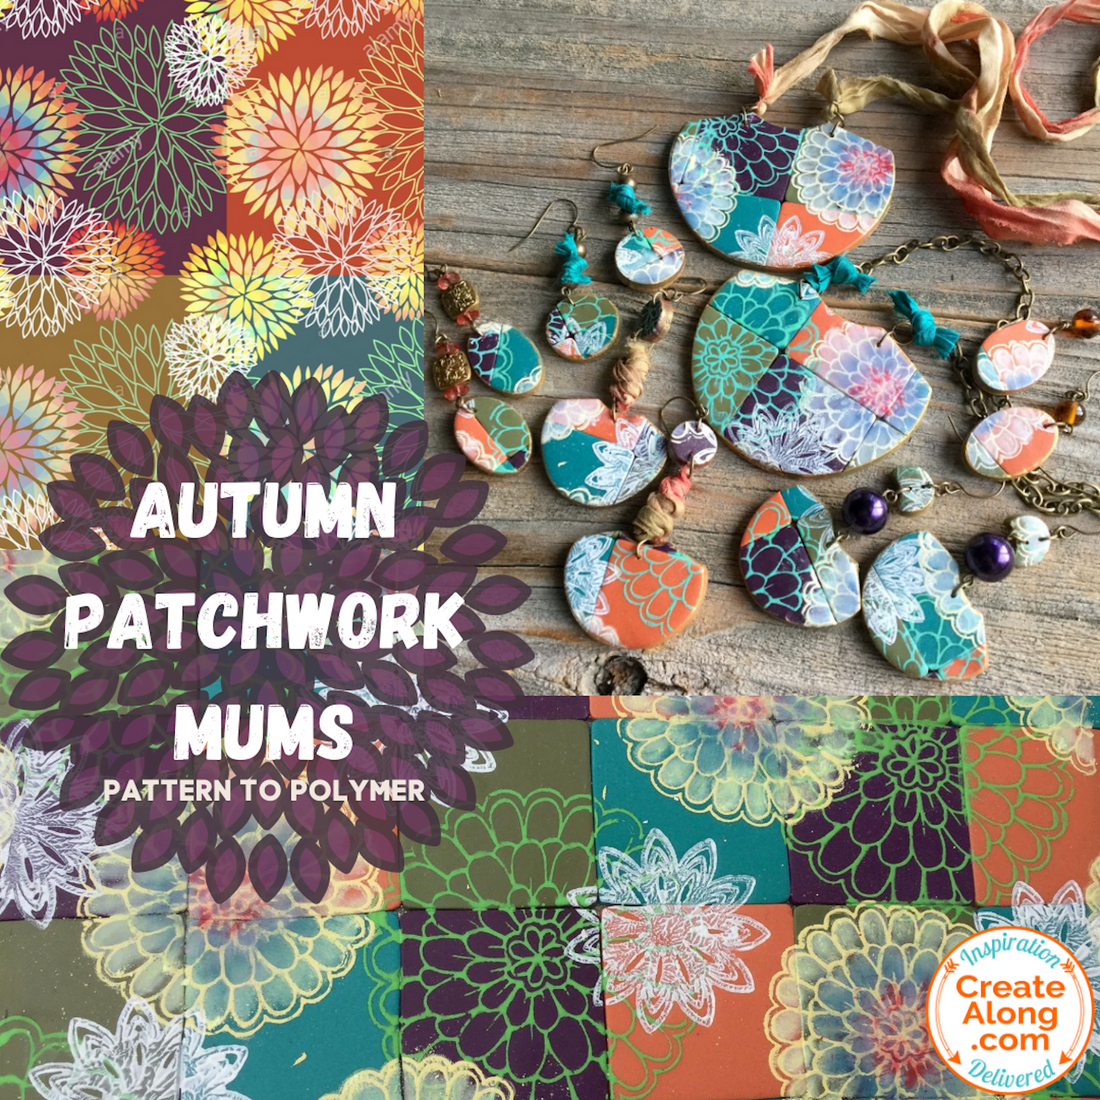 Learn How to Create Autumn Patchwork Mums Polymer Clay Jewelry